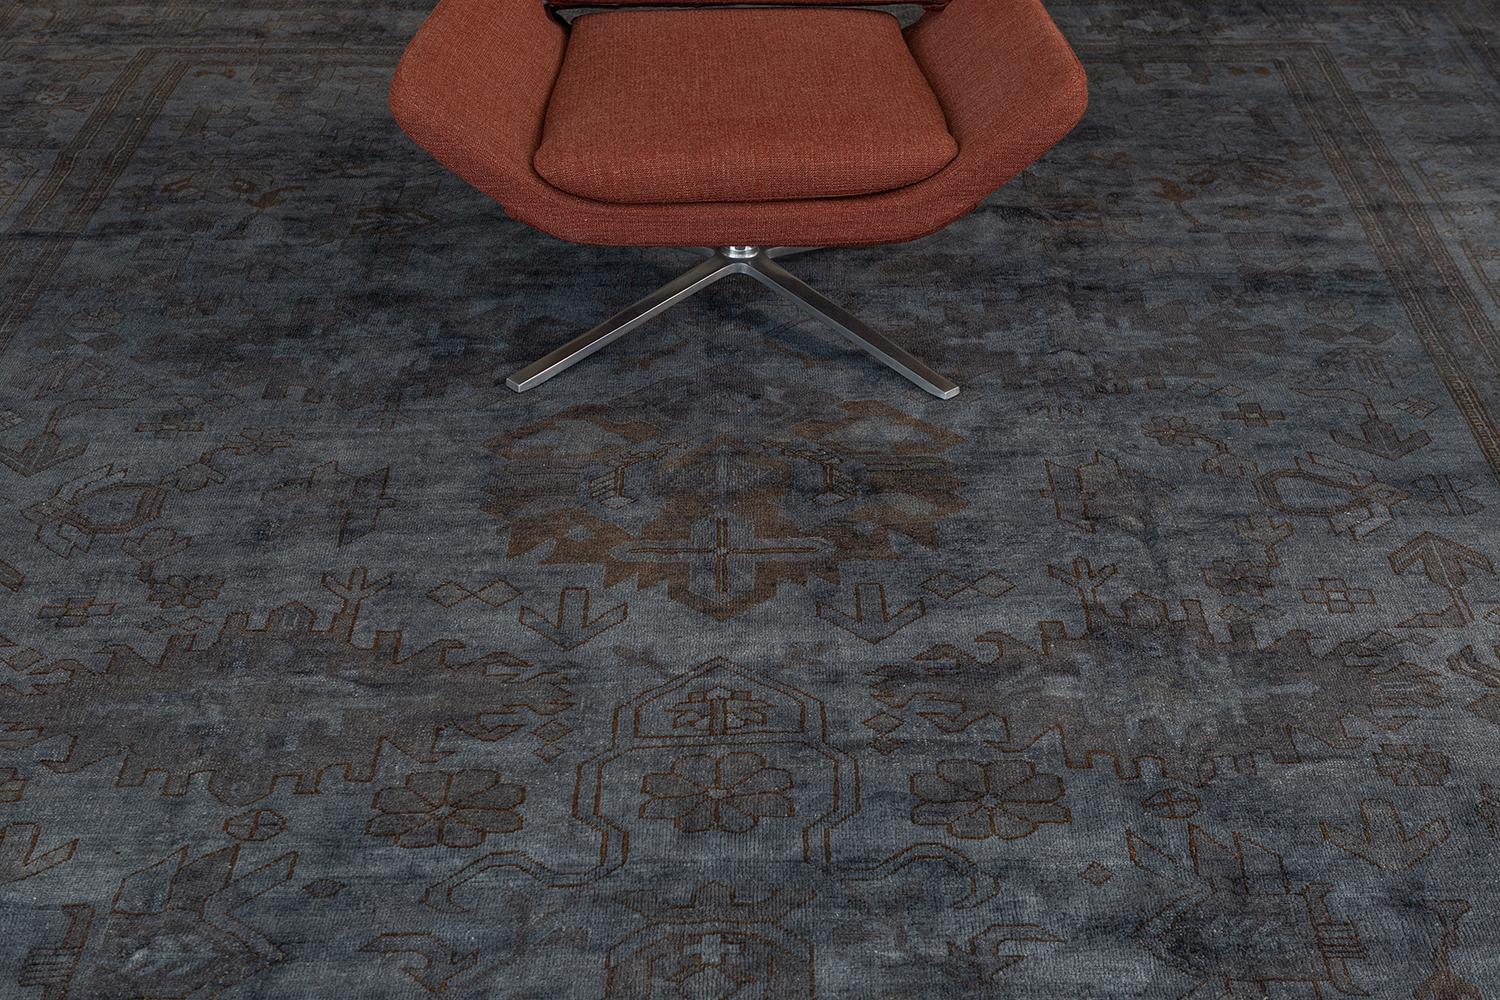 This fancy hand-spun wool over-dyed Oushak rug features the unnoticeable symmetrical palmettes, motifs, and medallion that are interwoven with this design. Different motifs are partly shown to create one of the most impressive rug designs. Saturated